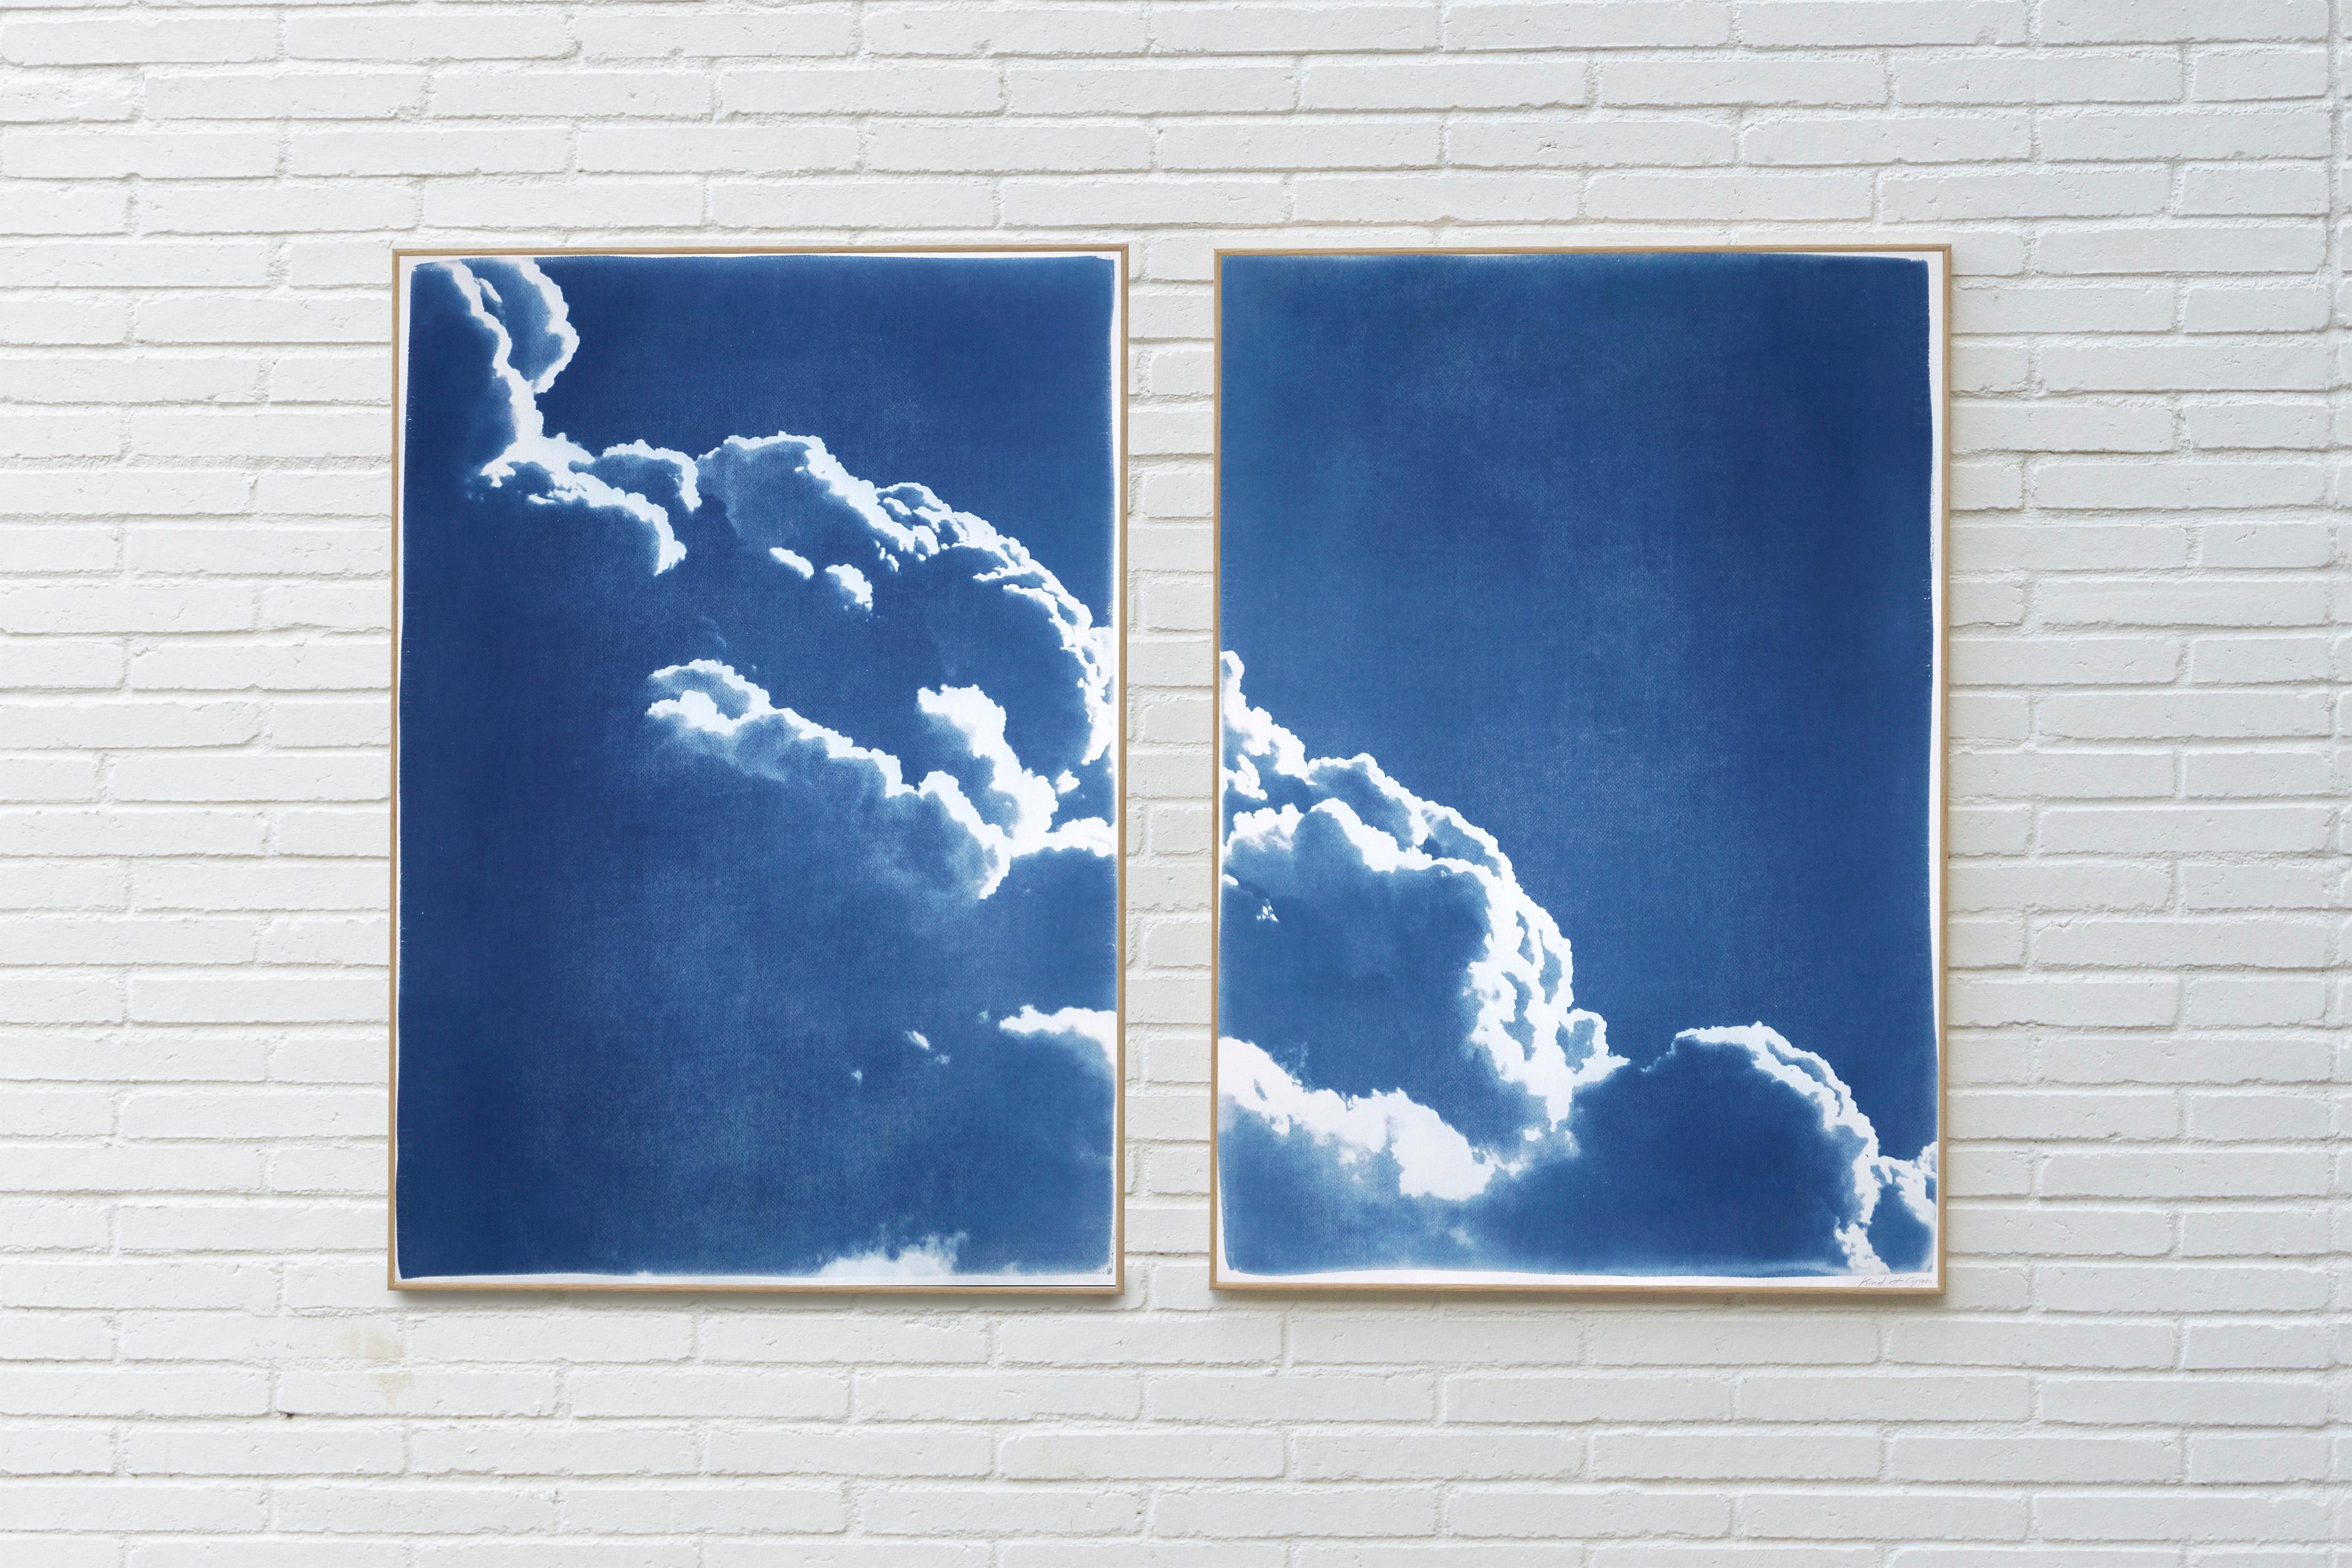 Diptych of Floating Clouds, Blue Tones Sky Scene Cyanotype Print of Silky Shapes - Realist Art by Kind of Cyan